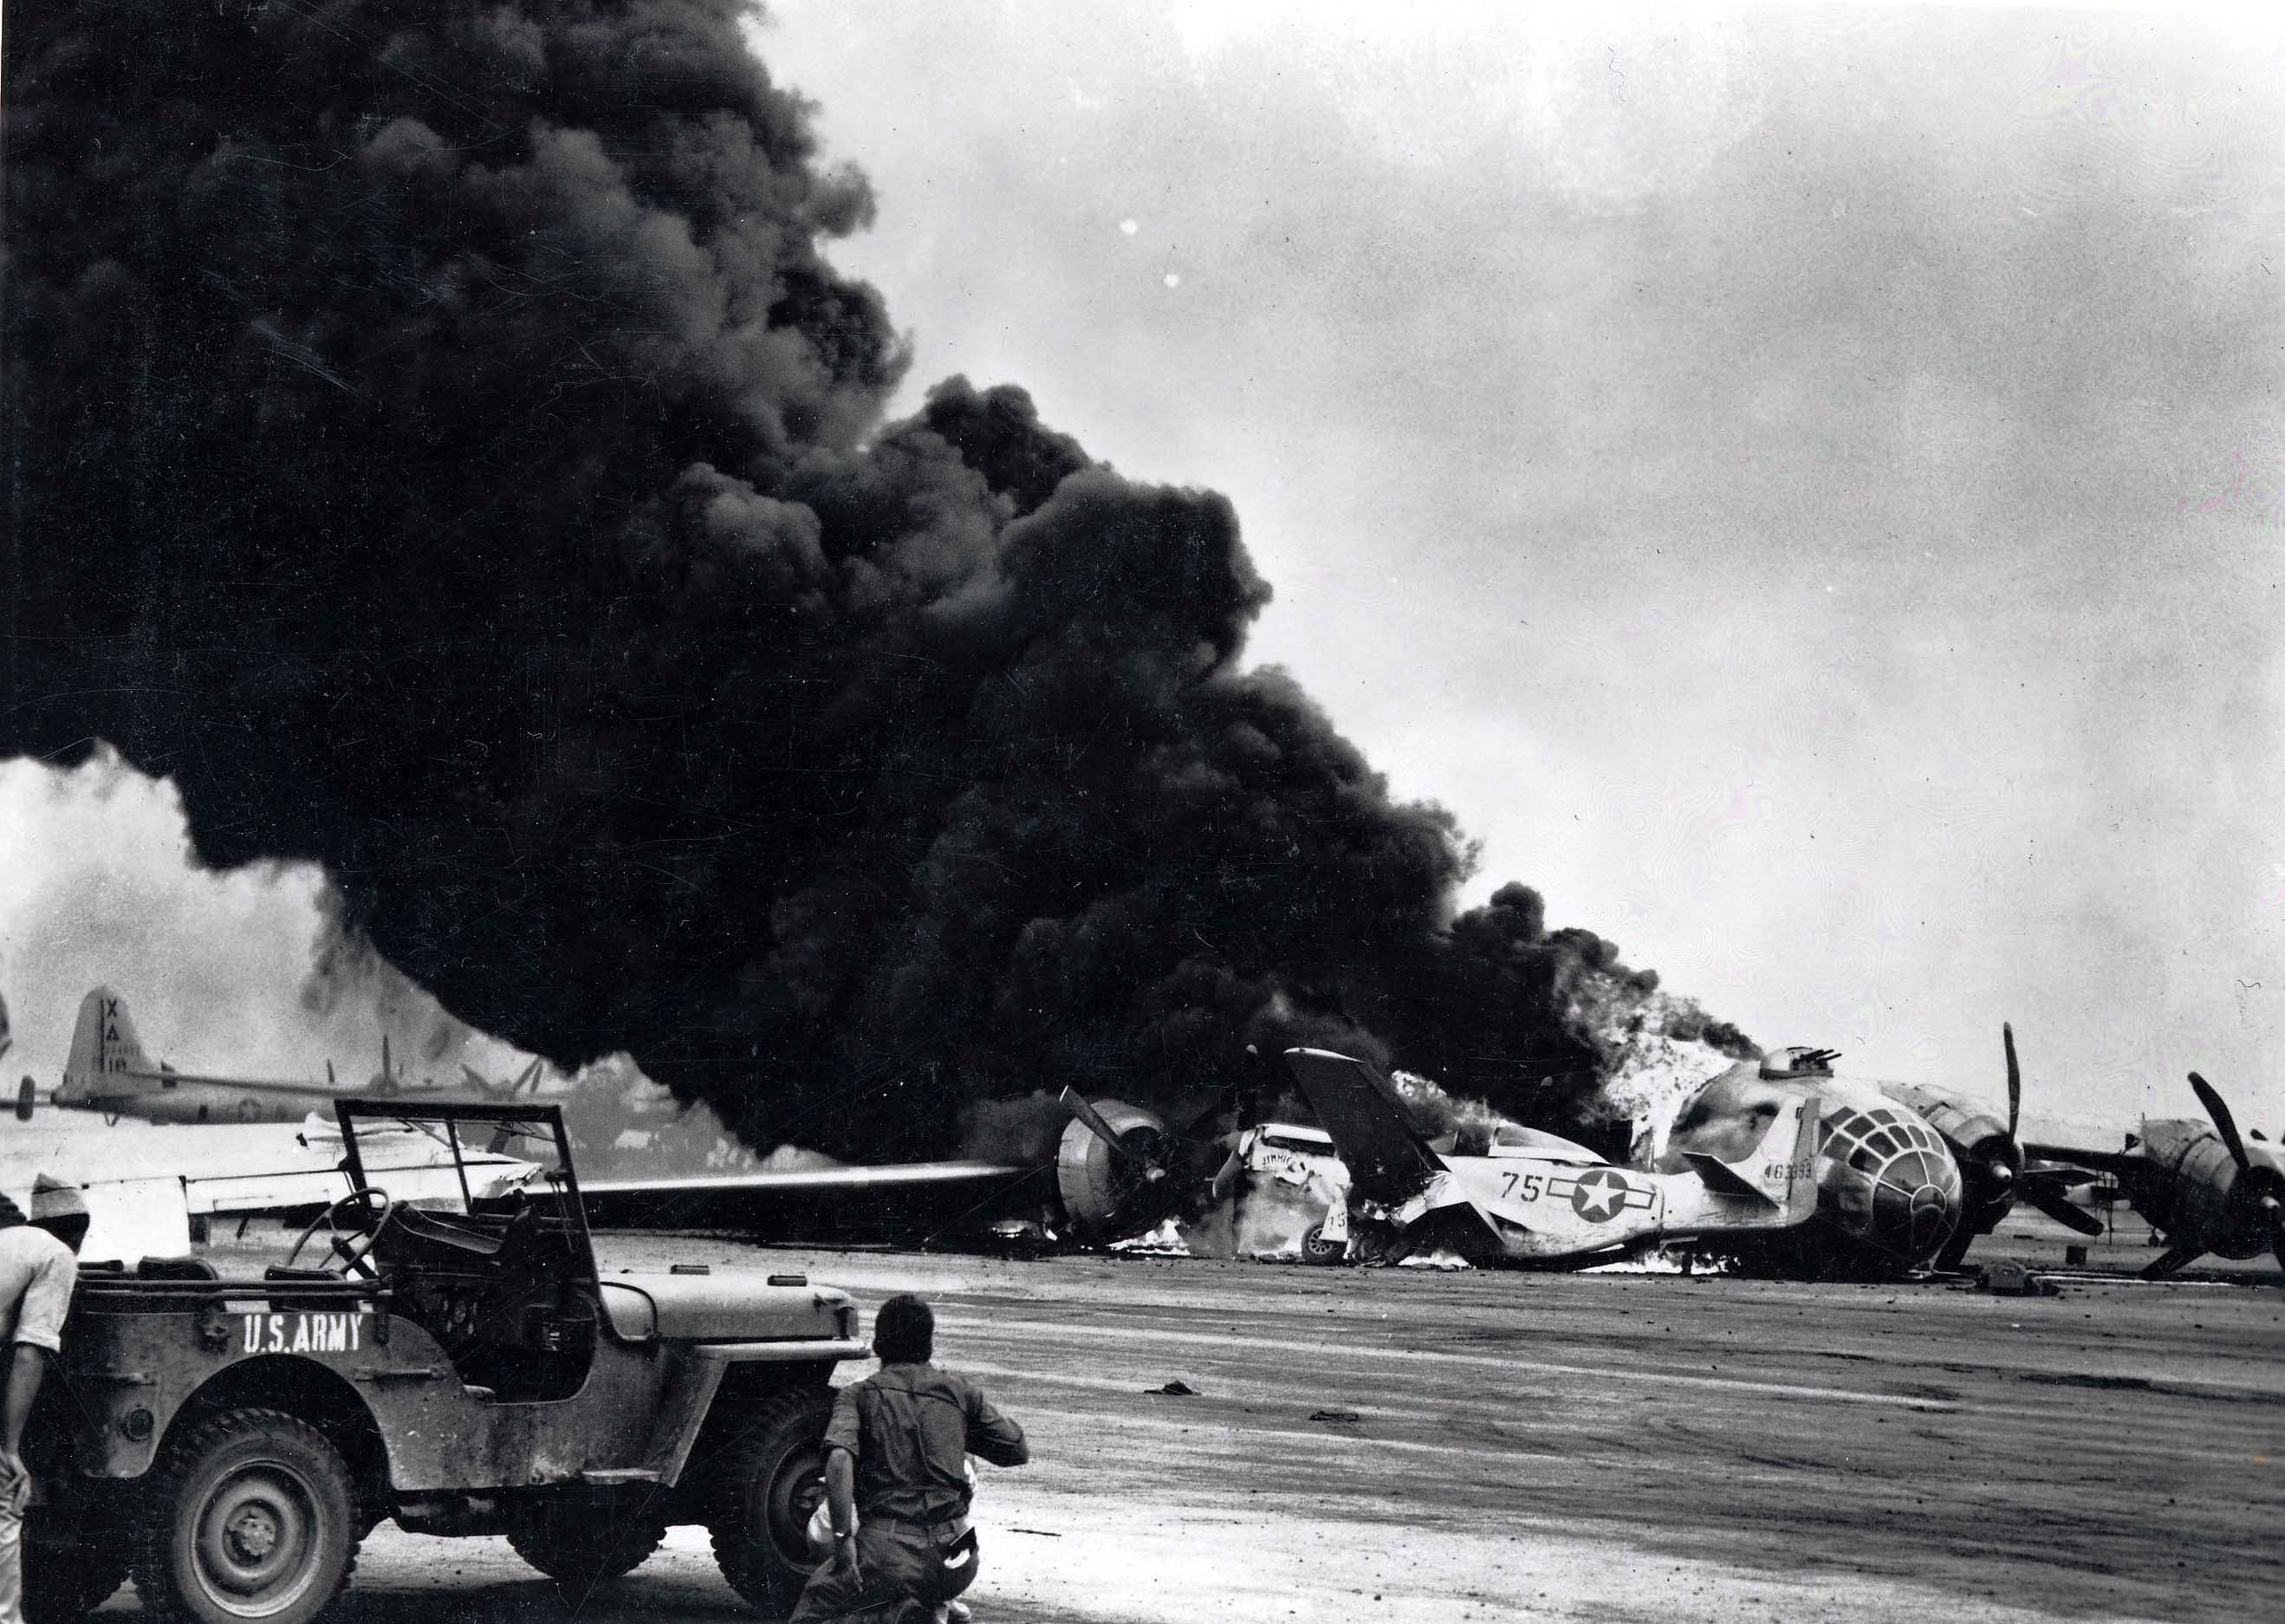 A B-29 Superfortress crashed during an attempted emergency landing on Iwo Jima Apr 24, 1945 and ran into nine P-51 Mustangs. Ground personnel wait behind a Jeep for all ammunition to cook off.